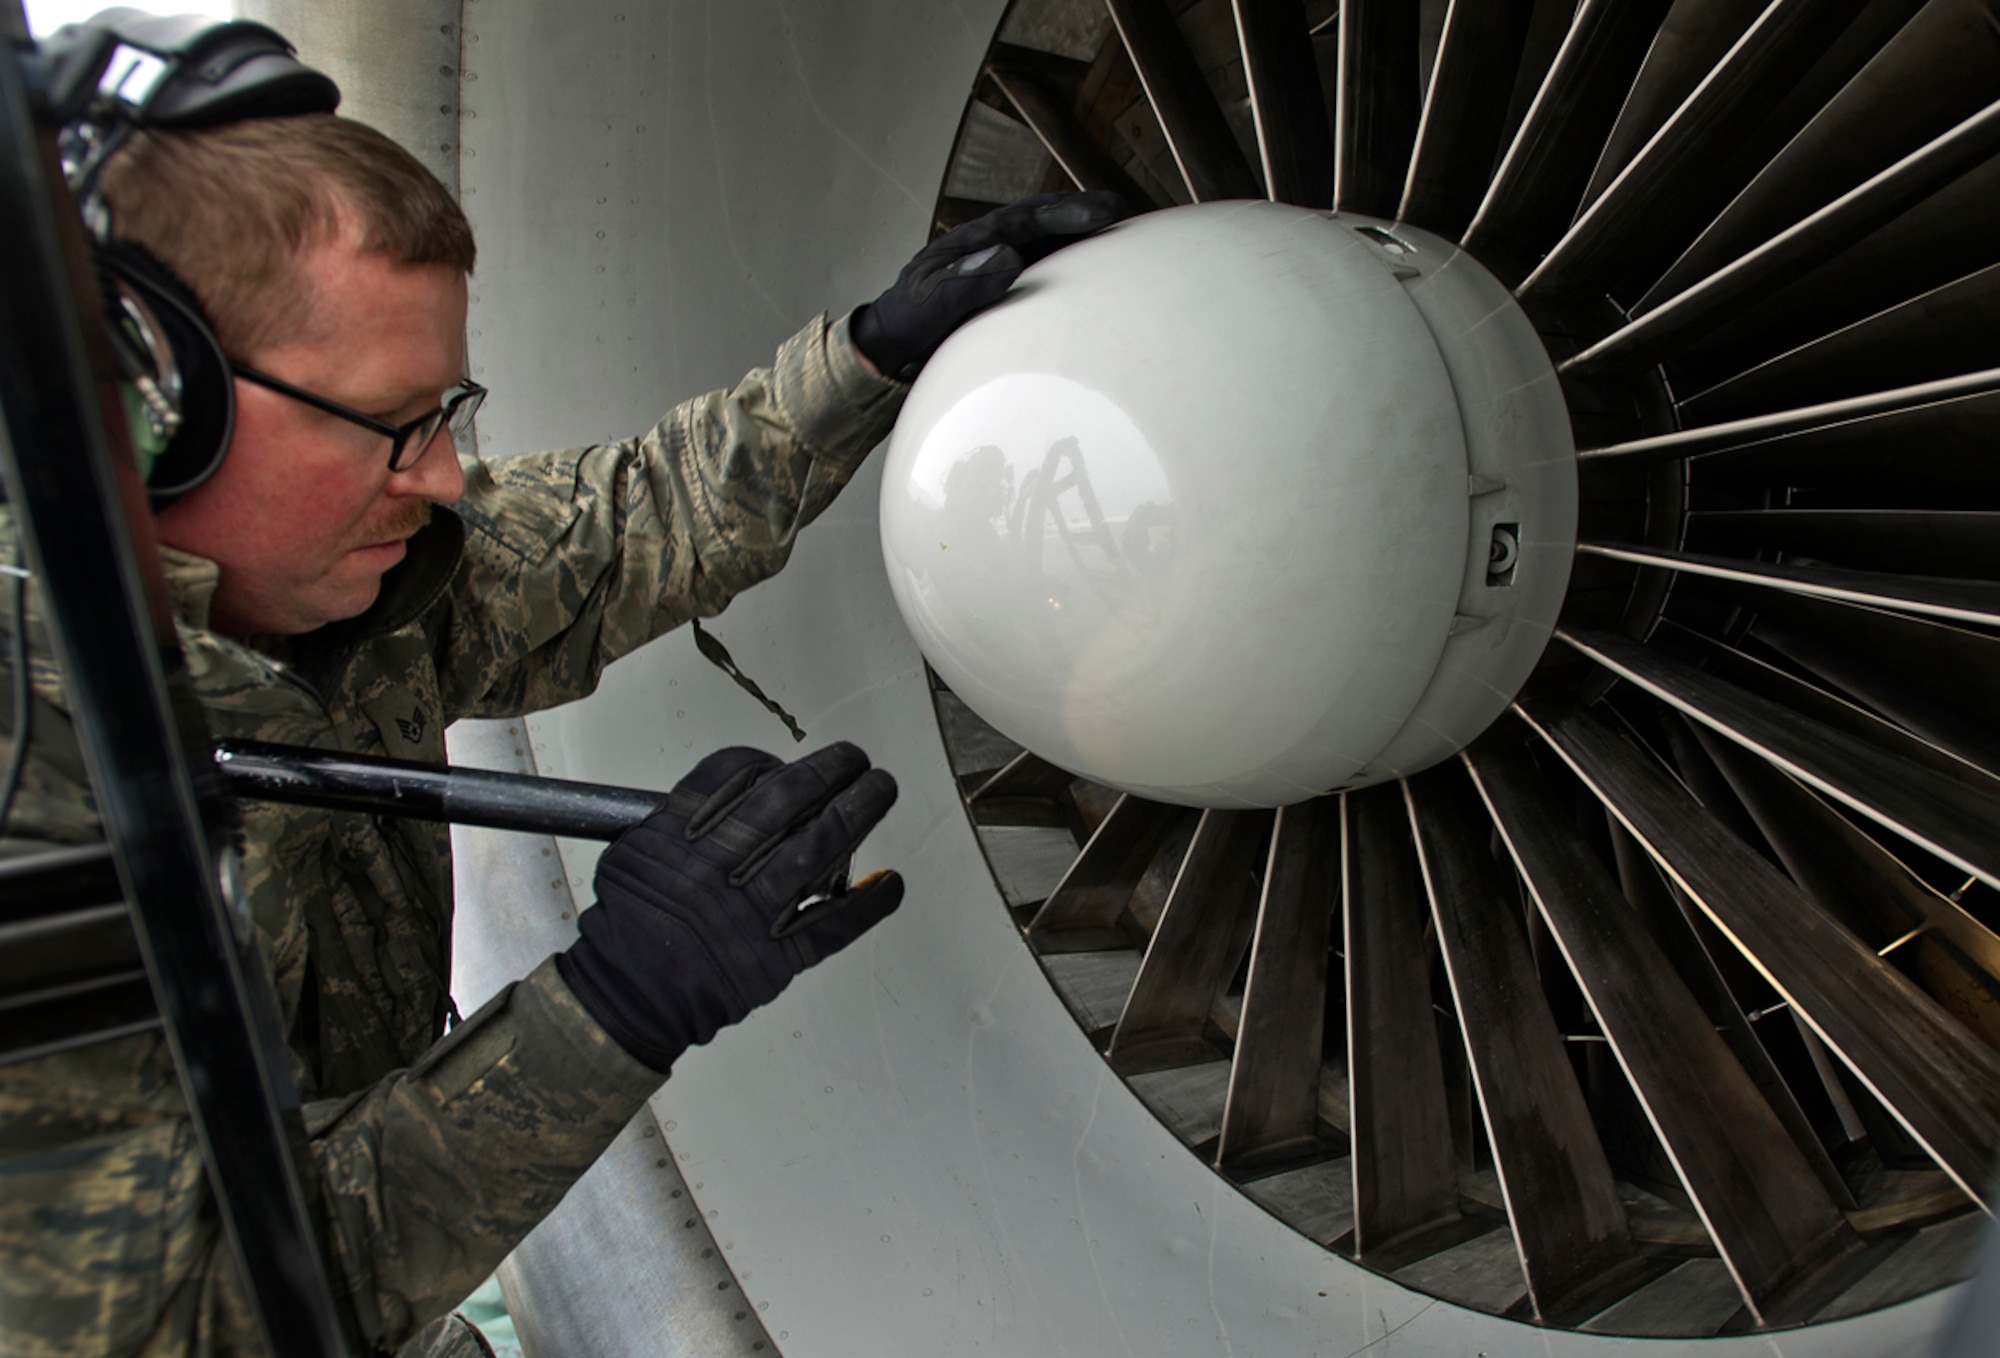 Air Force Staff Sgt. Brian Howard, assigned to the 962nd Aircraft Maintenance Unit, checks an engine on a E-3 Sentry Airborne Warning and Control System aircraft after a mission on Joint Base Elmendorf-Richardson, Alaska, Wednesday, March 17, 2014. (U.S. Air Force photo by Justin Connaher/Released)